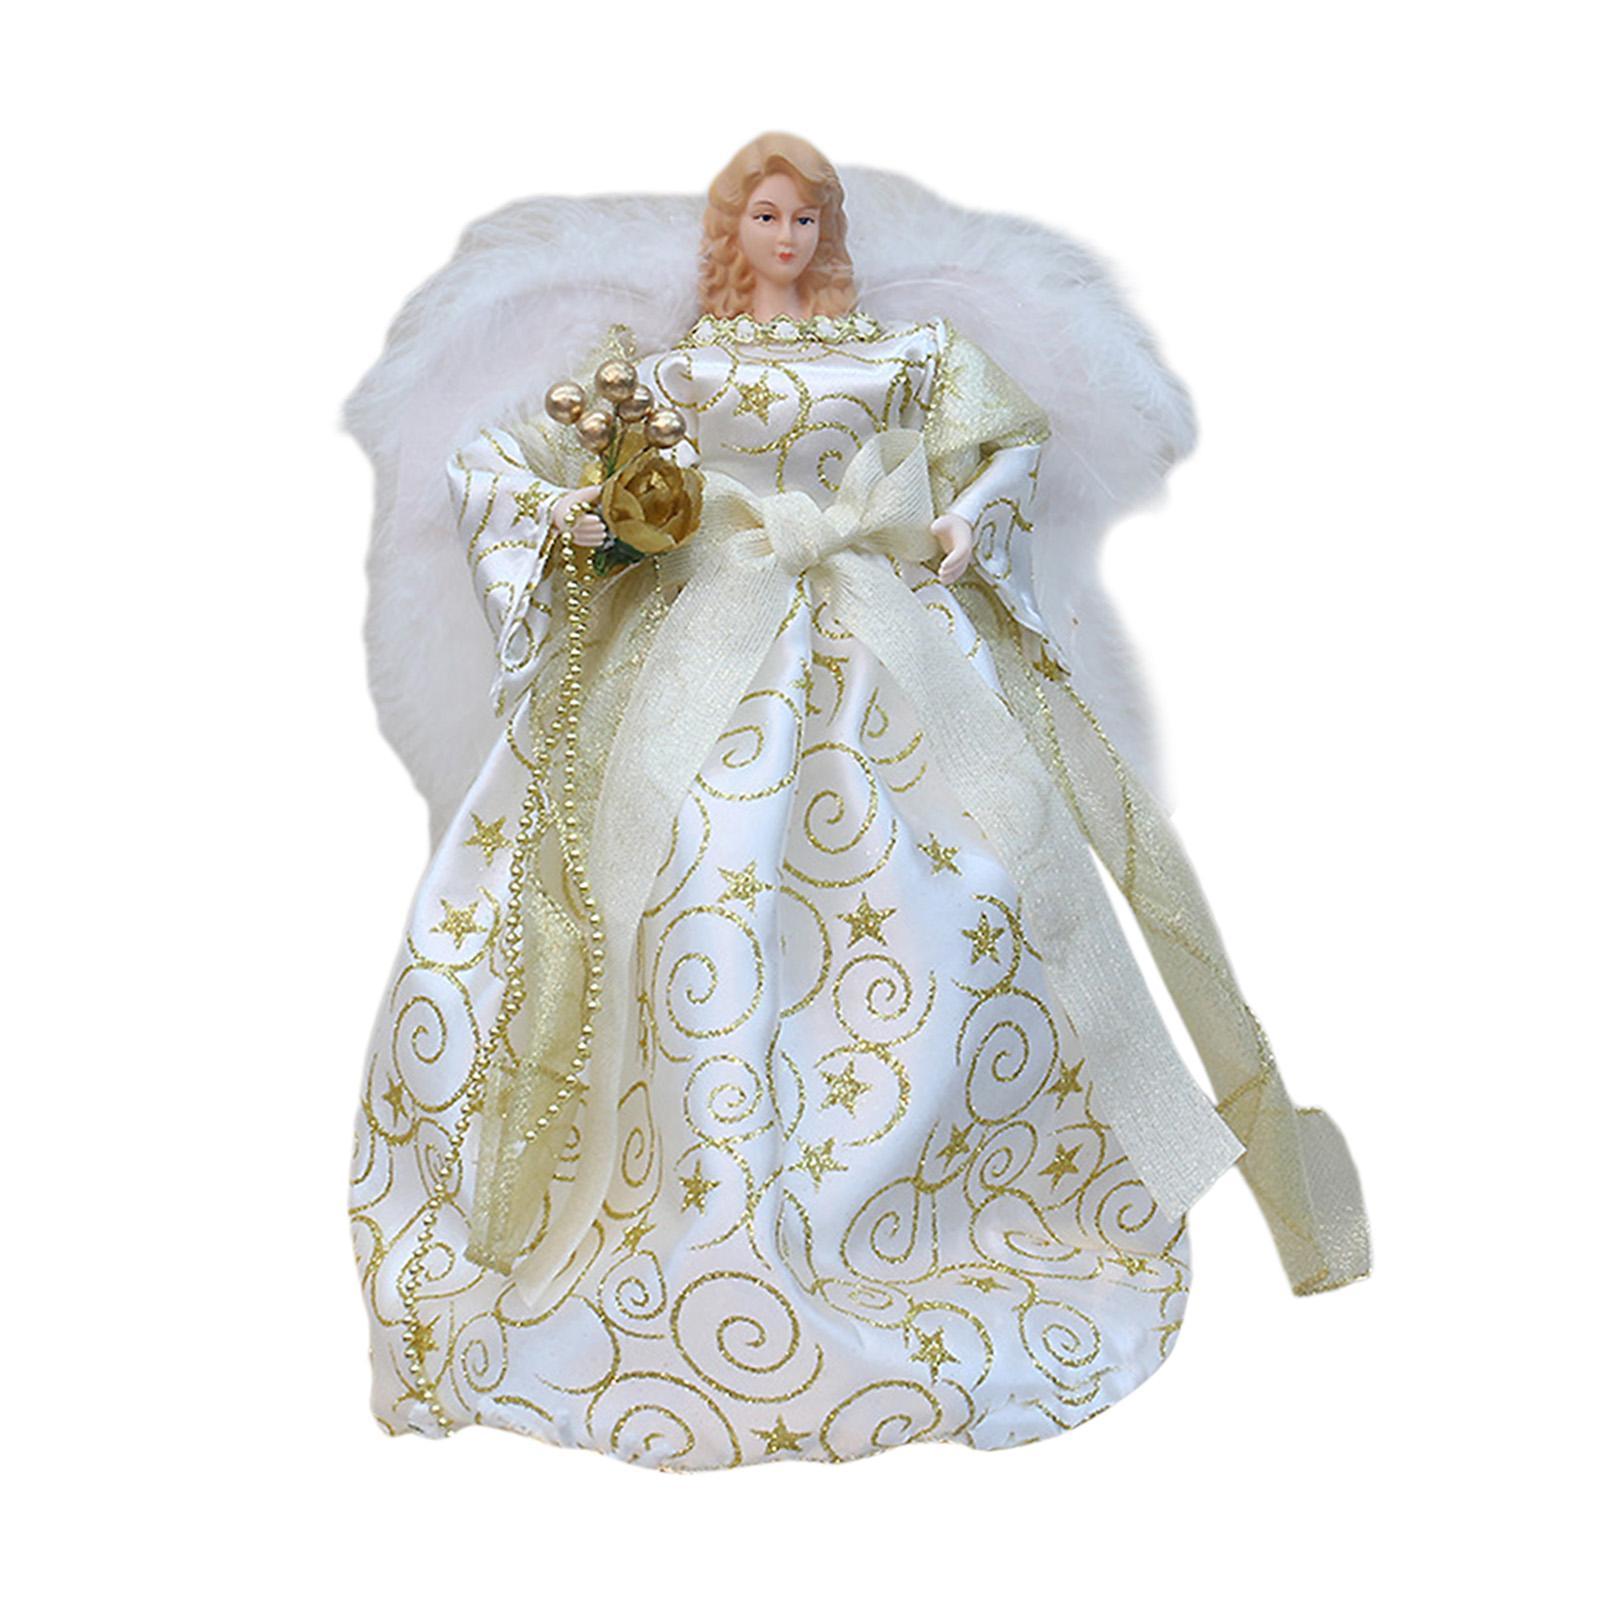 Angel Treetop Christmas , Delicate Christmas Ornament Decoration, Angel Figurine for Holiday Party Home Decor